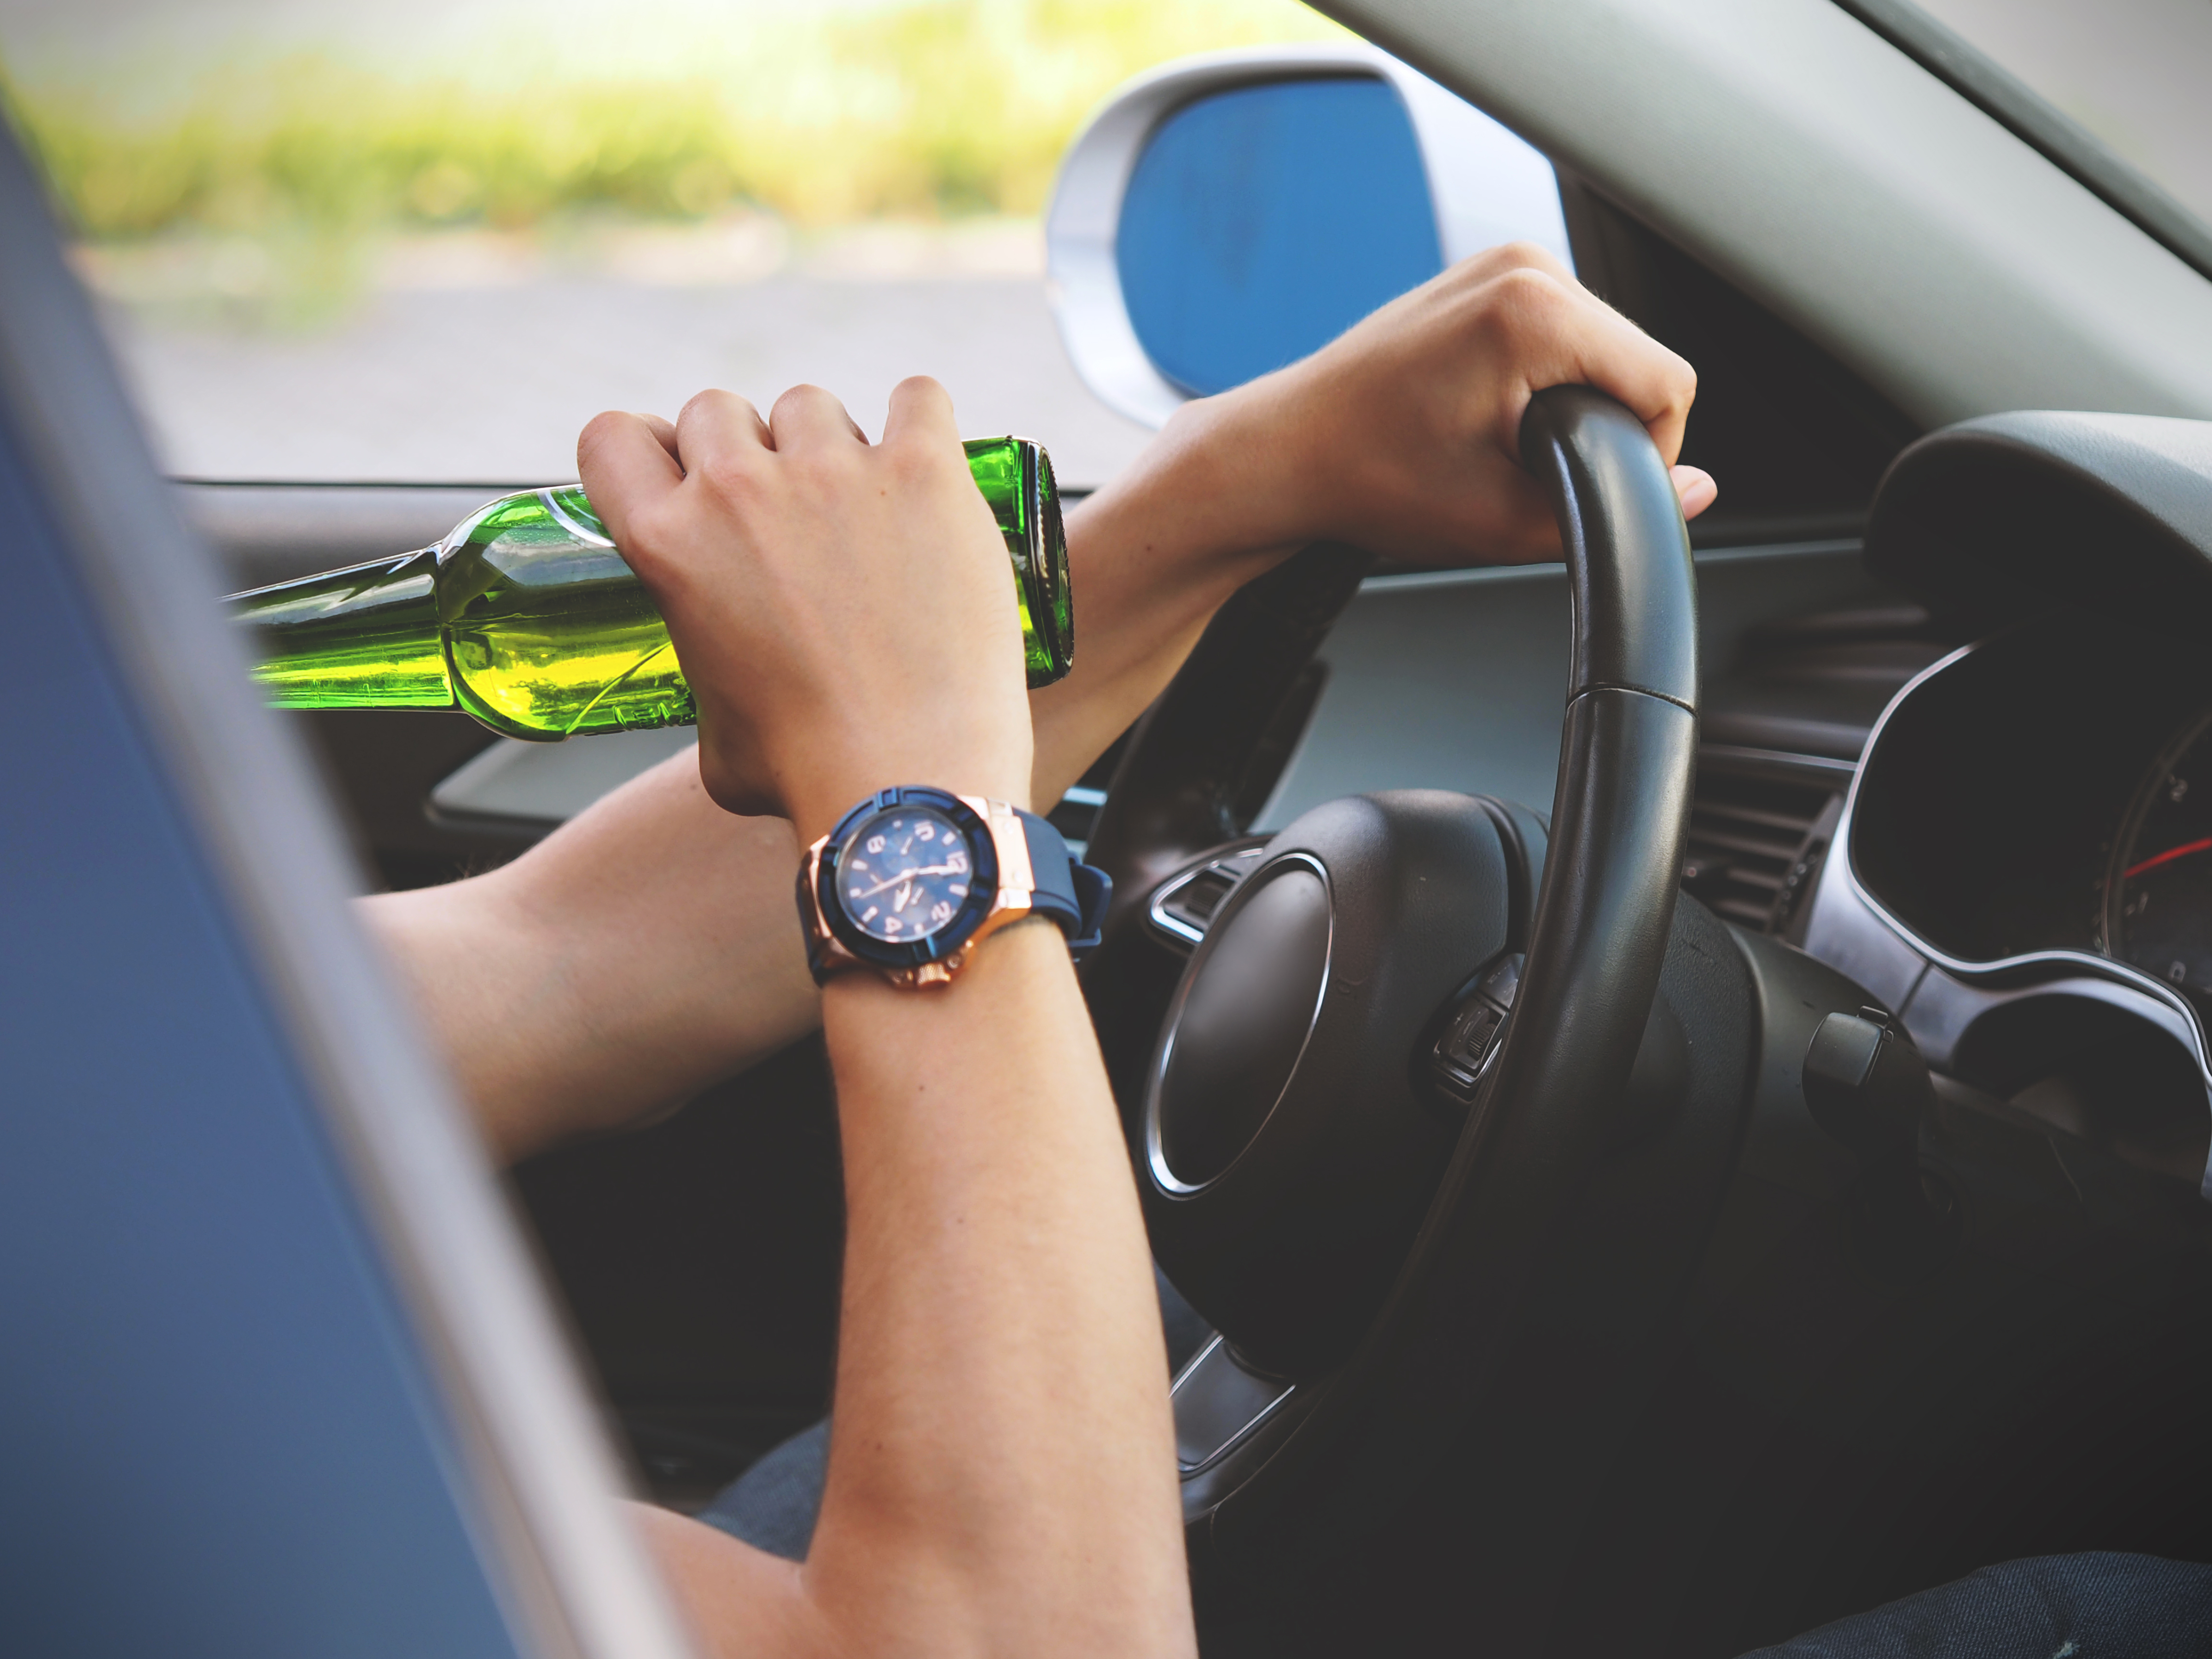 Across the nation, drinking and driving is punished harshly by law, and with good reason.